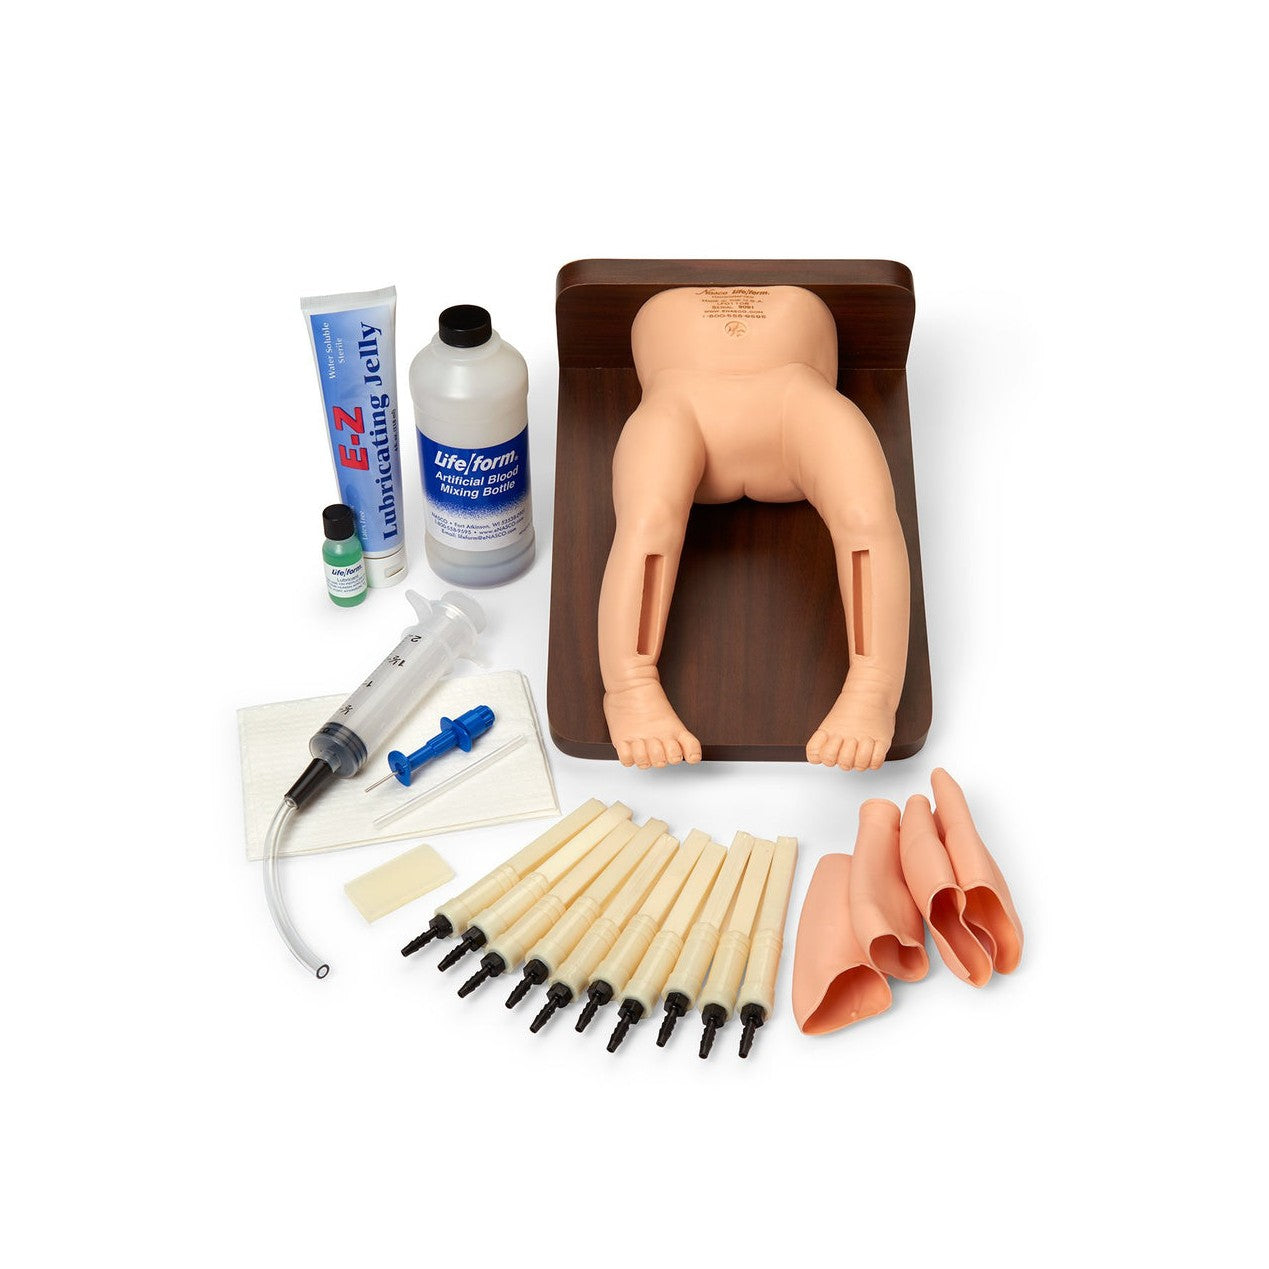 Life/form® Intraosseous Infusion Simulator